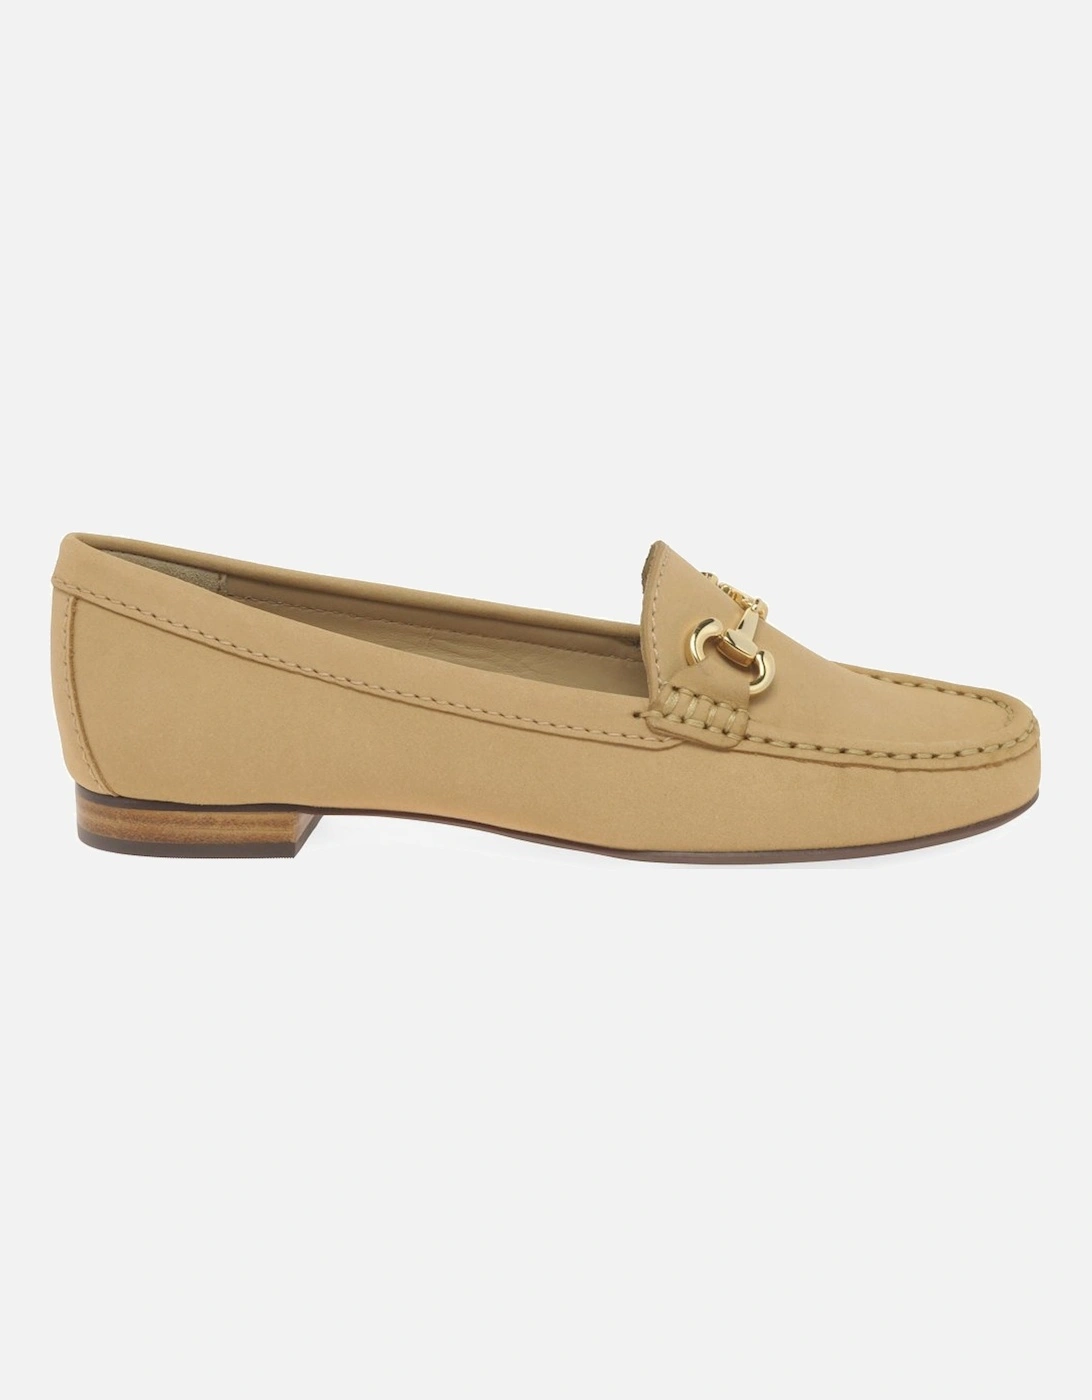 Sunny Womens Moccasins